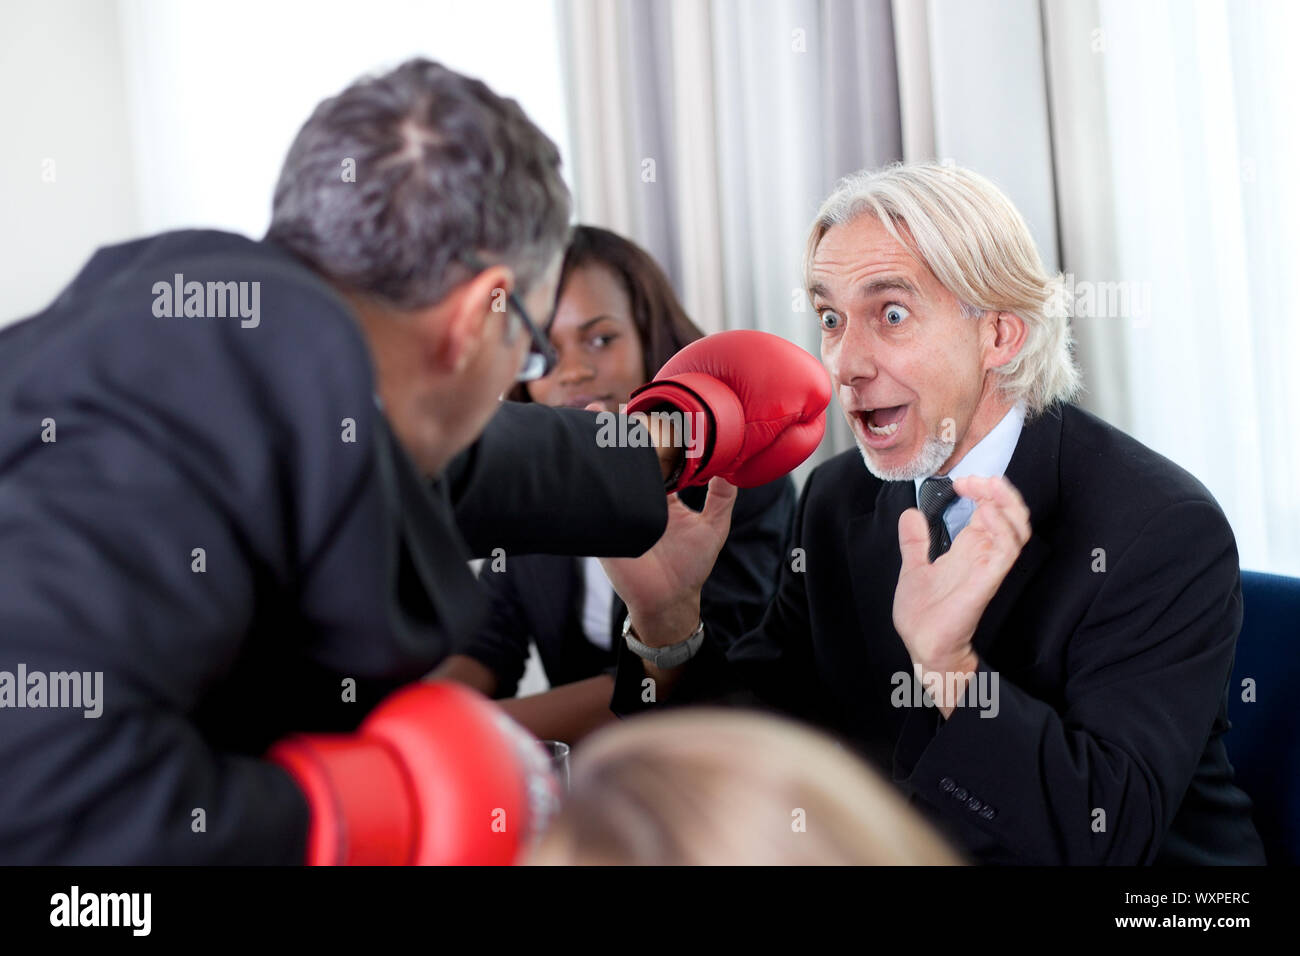 Team of business associates fighting in the office Stock Photo